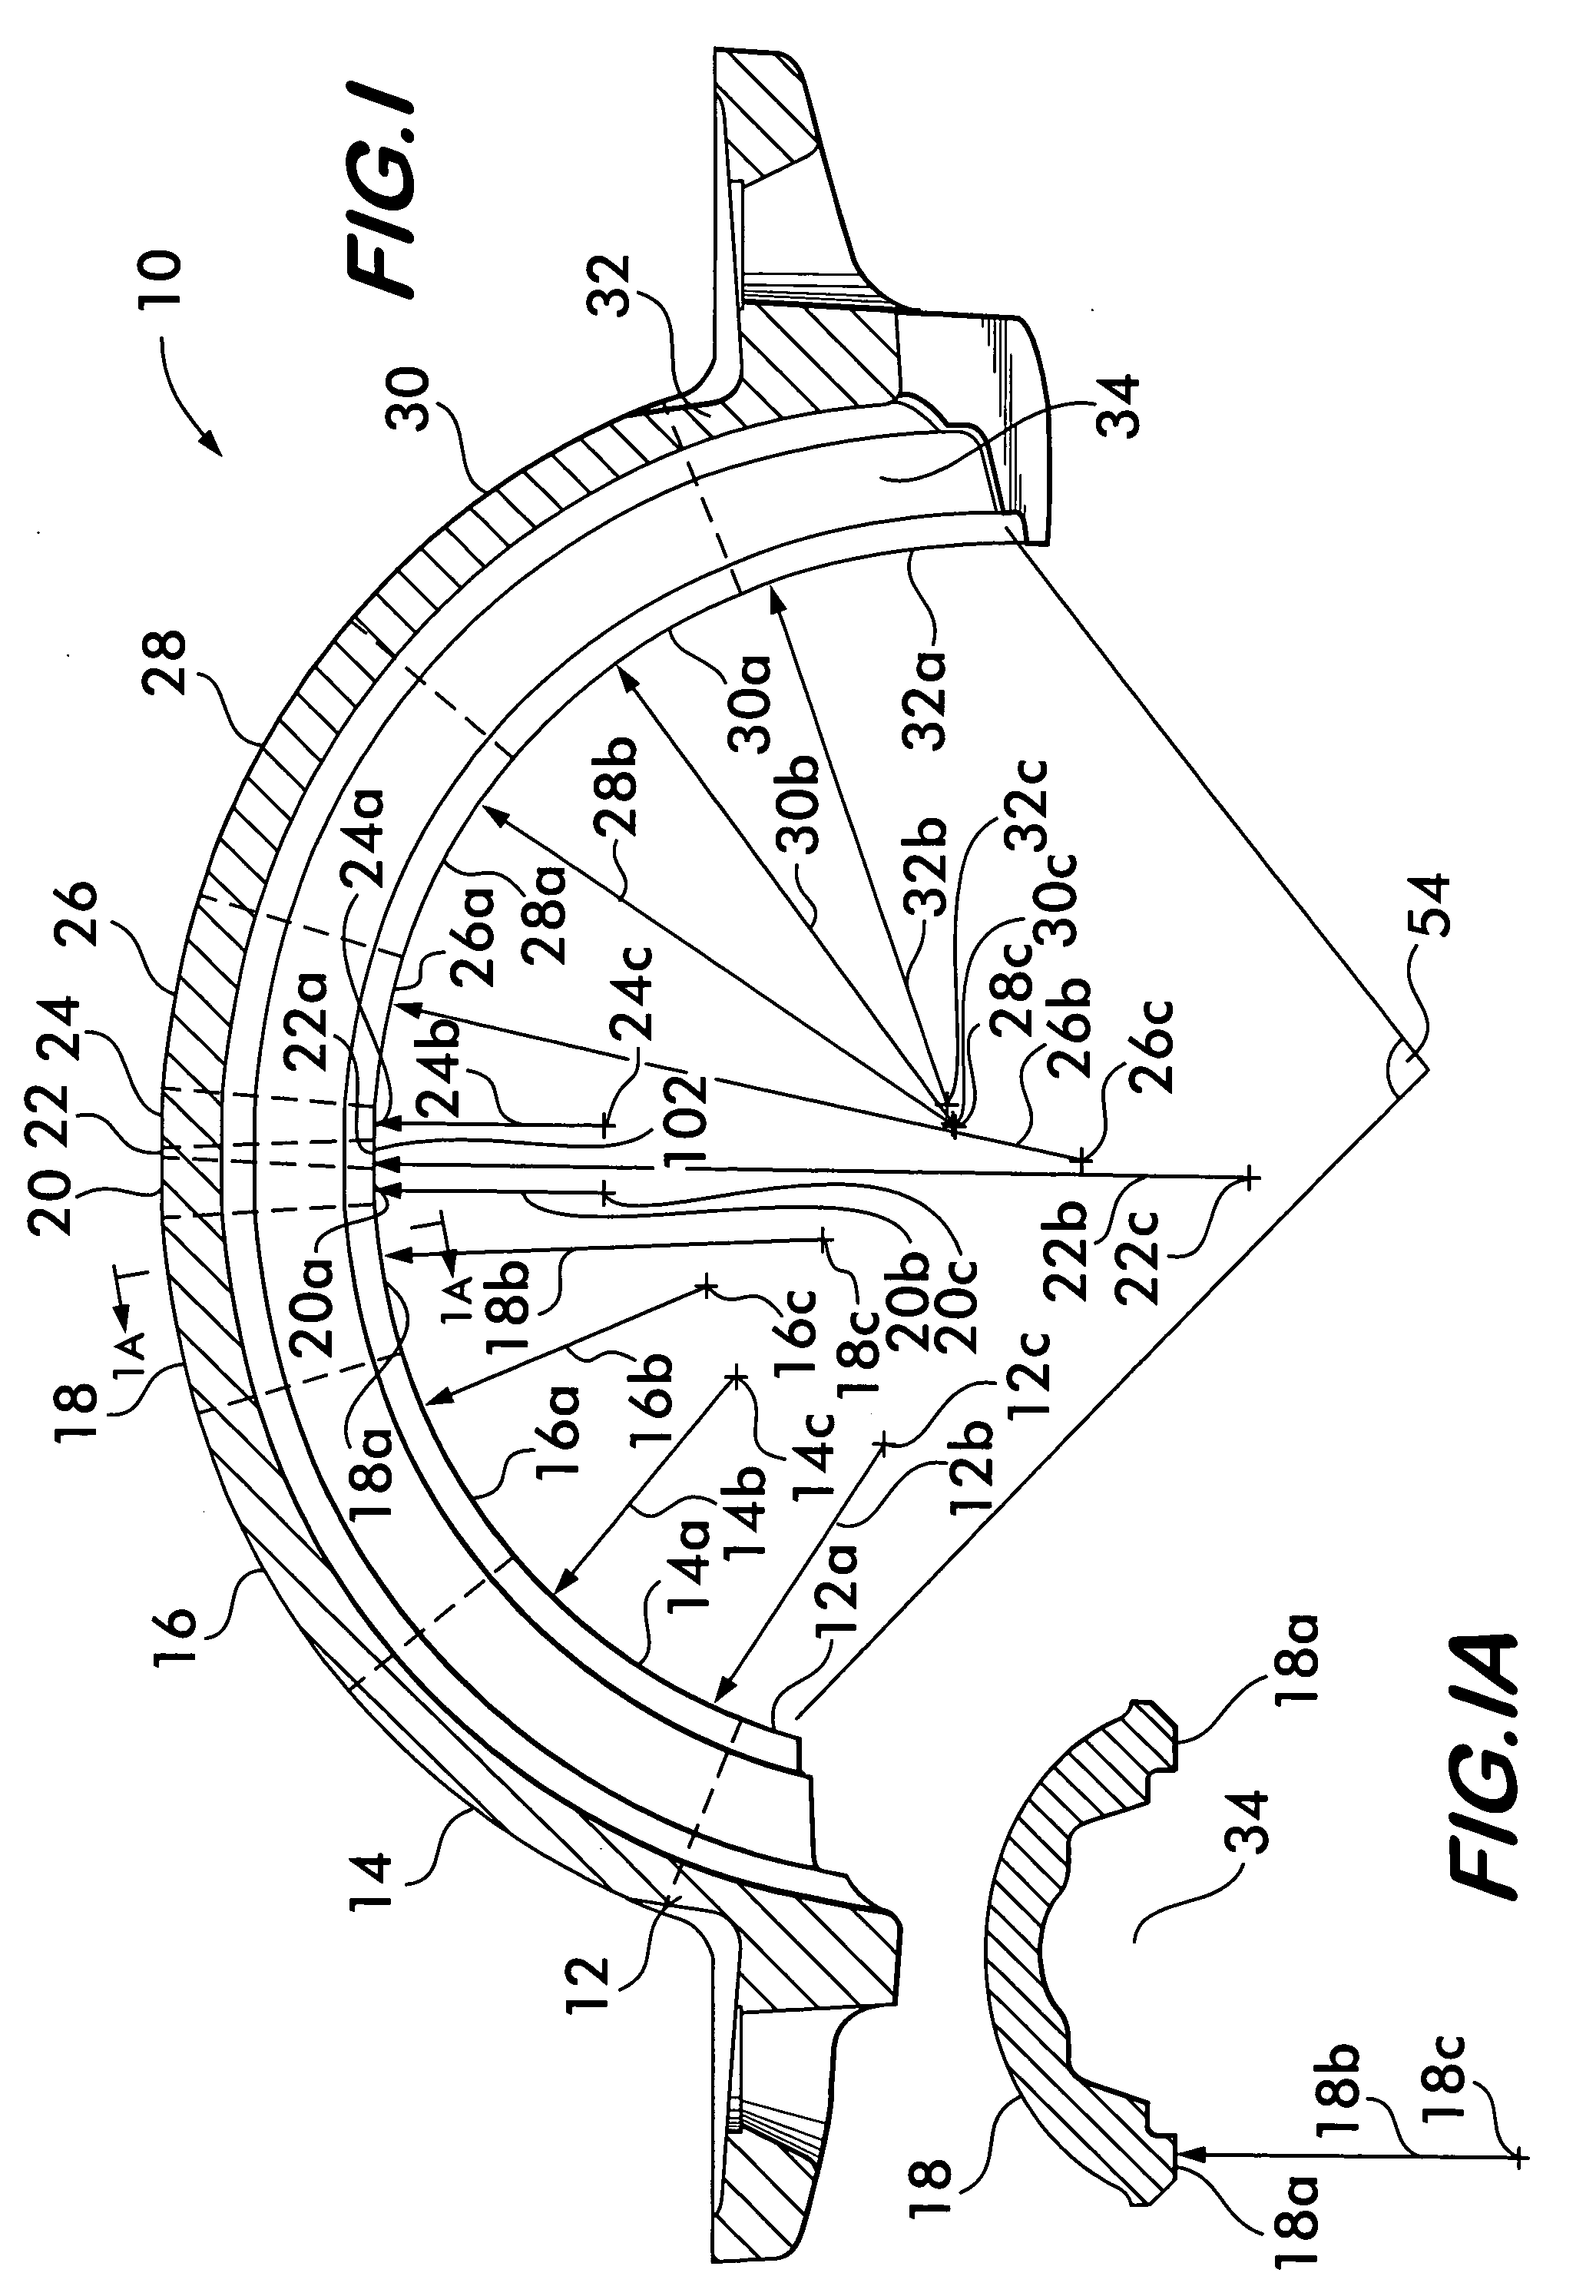 Deformable pipe coupling having multiple radii of curvature